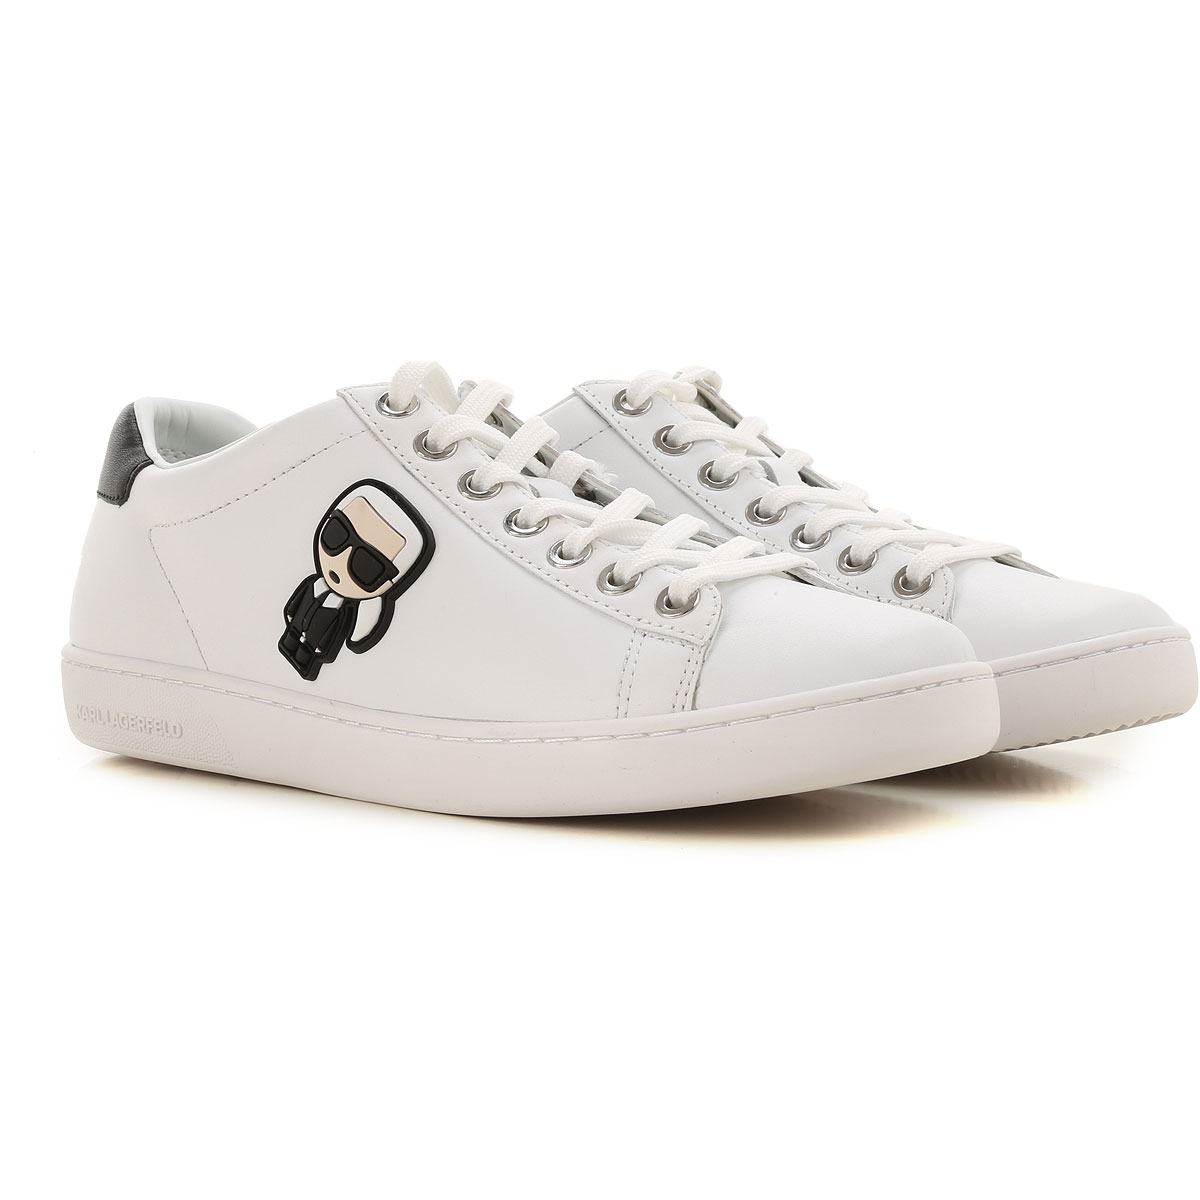 Womens Shoes Karl Lagerfeld, Style code: kl61230-011-kupsole